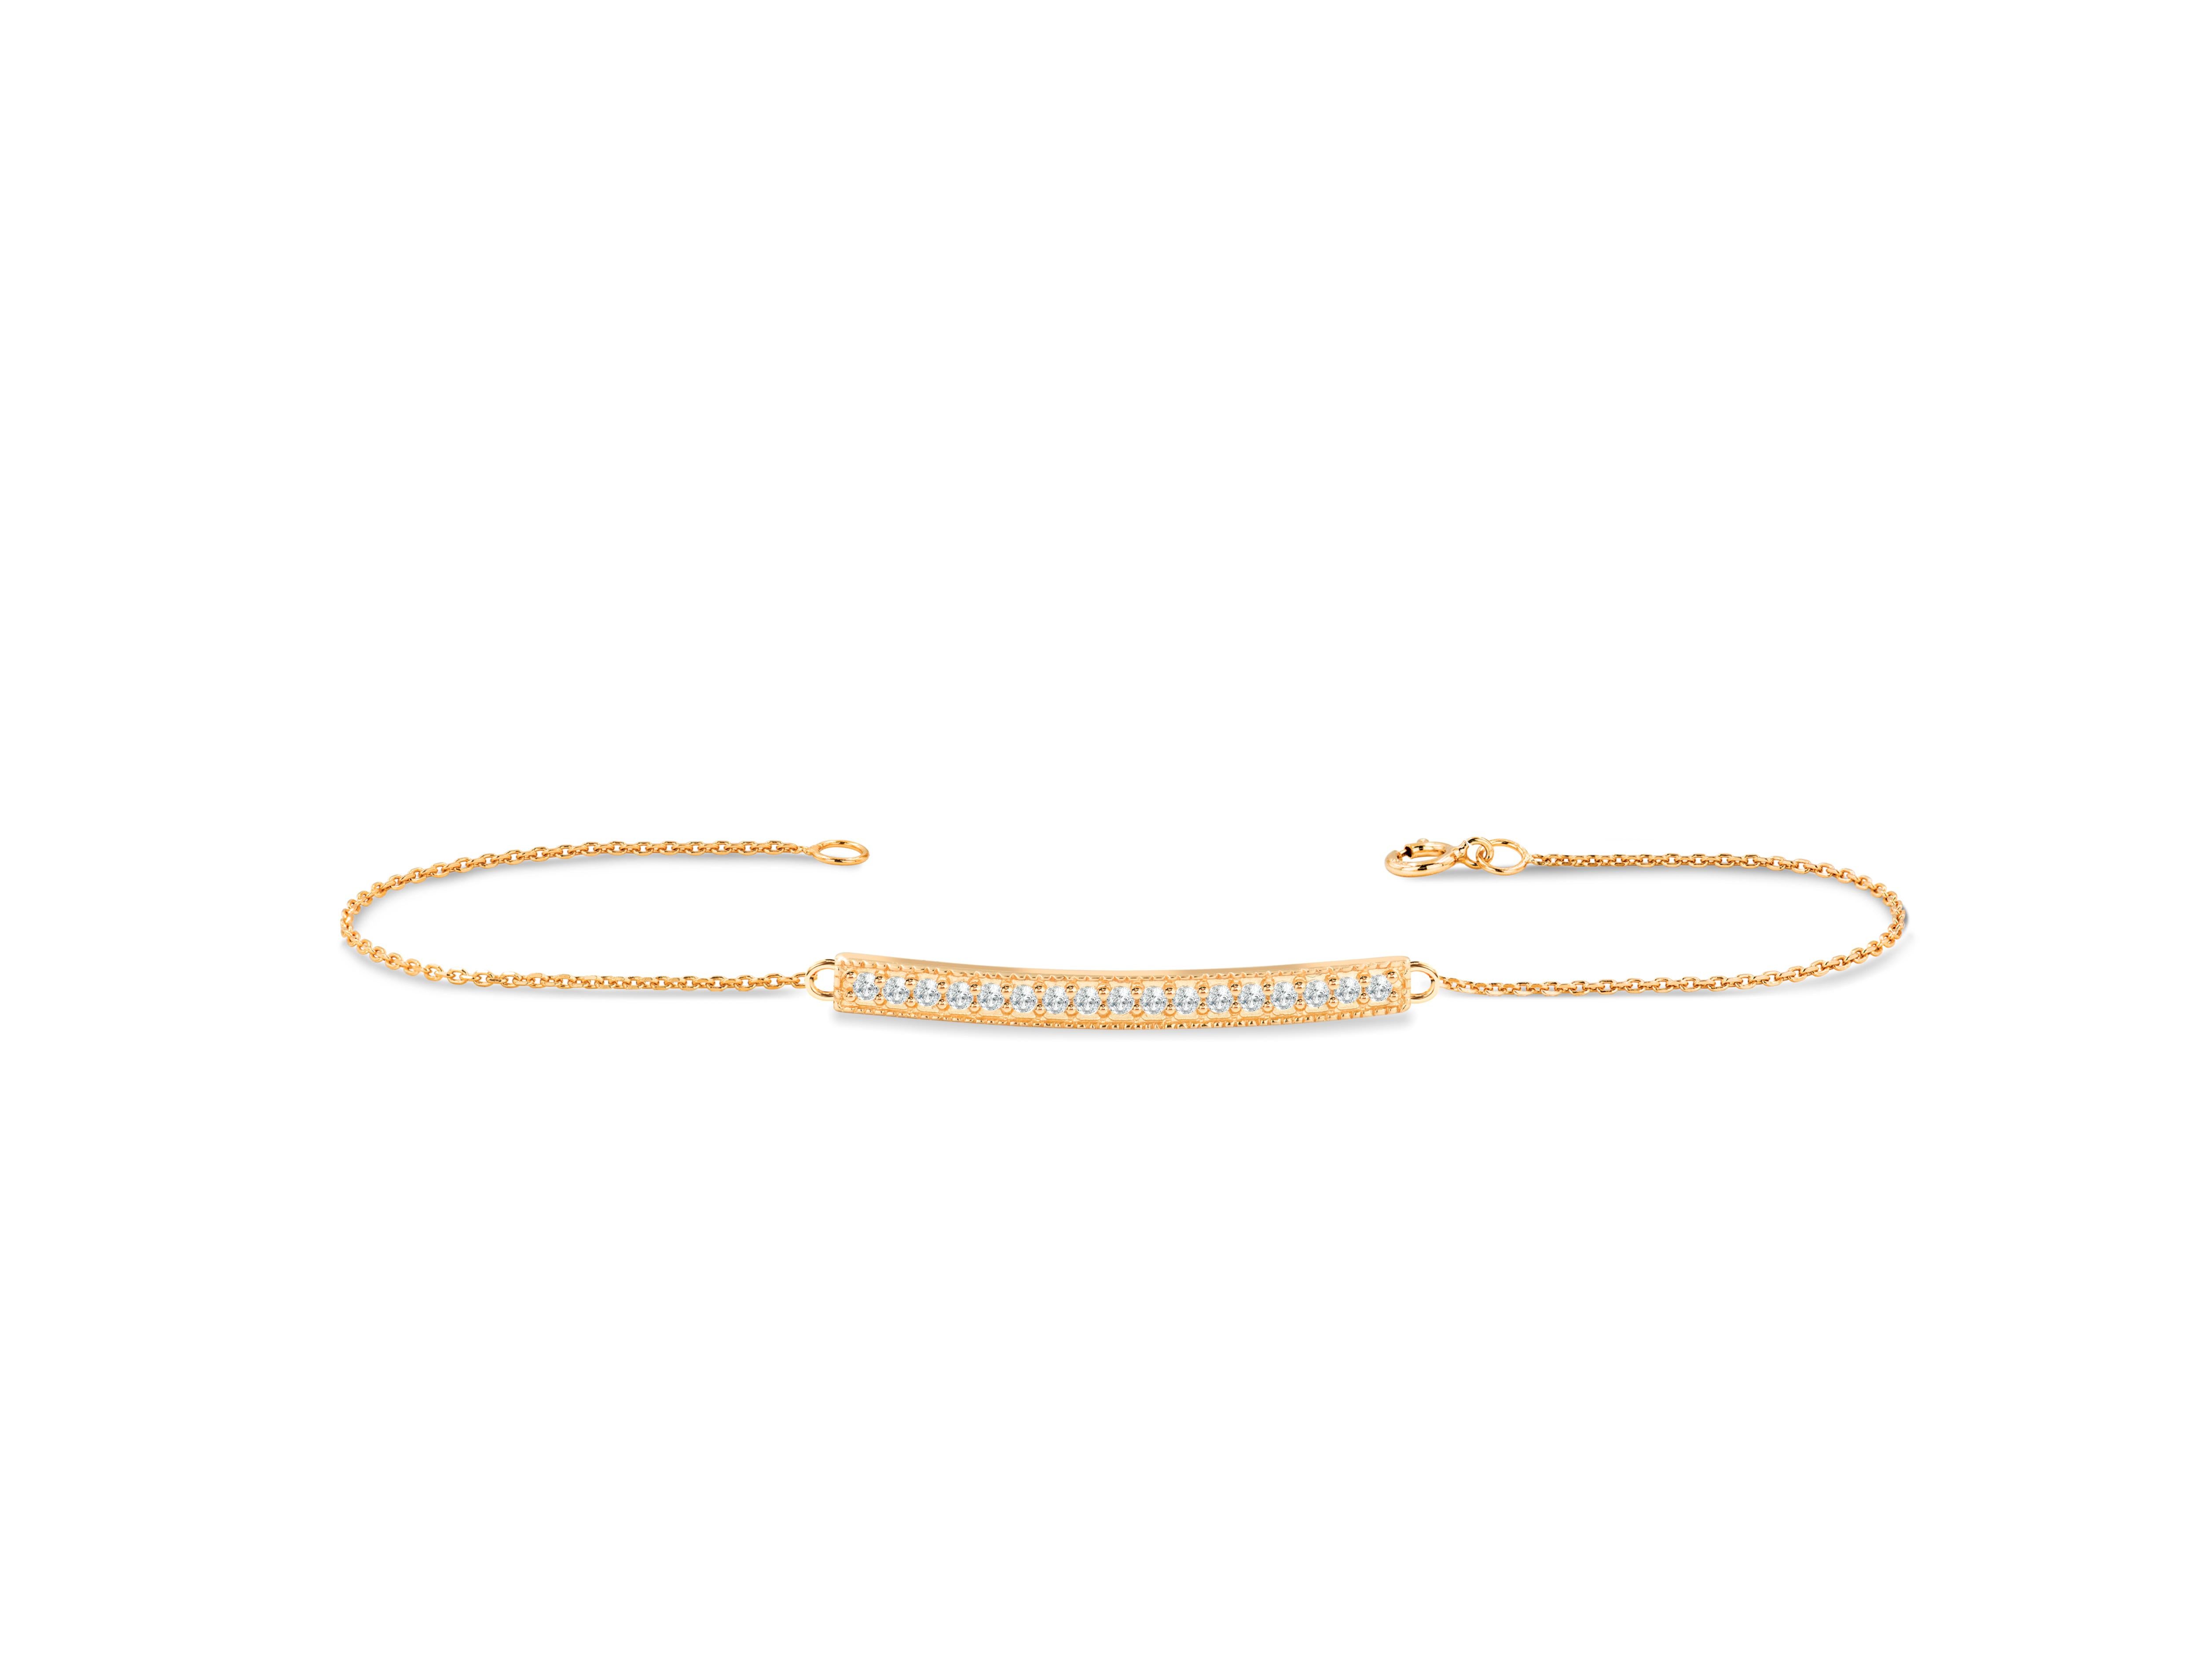 Beautiful and elegant, this Diamond bar bracelet is the perfect jewelry to layer in with your other bracelets made with pure gold and consists of genuine and natural diamonds. This minimalist bracelet gives a sophisticated yet classy look to your